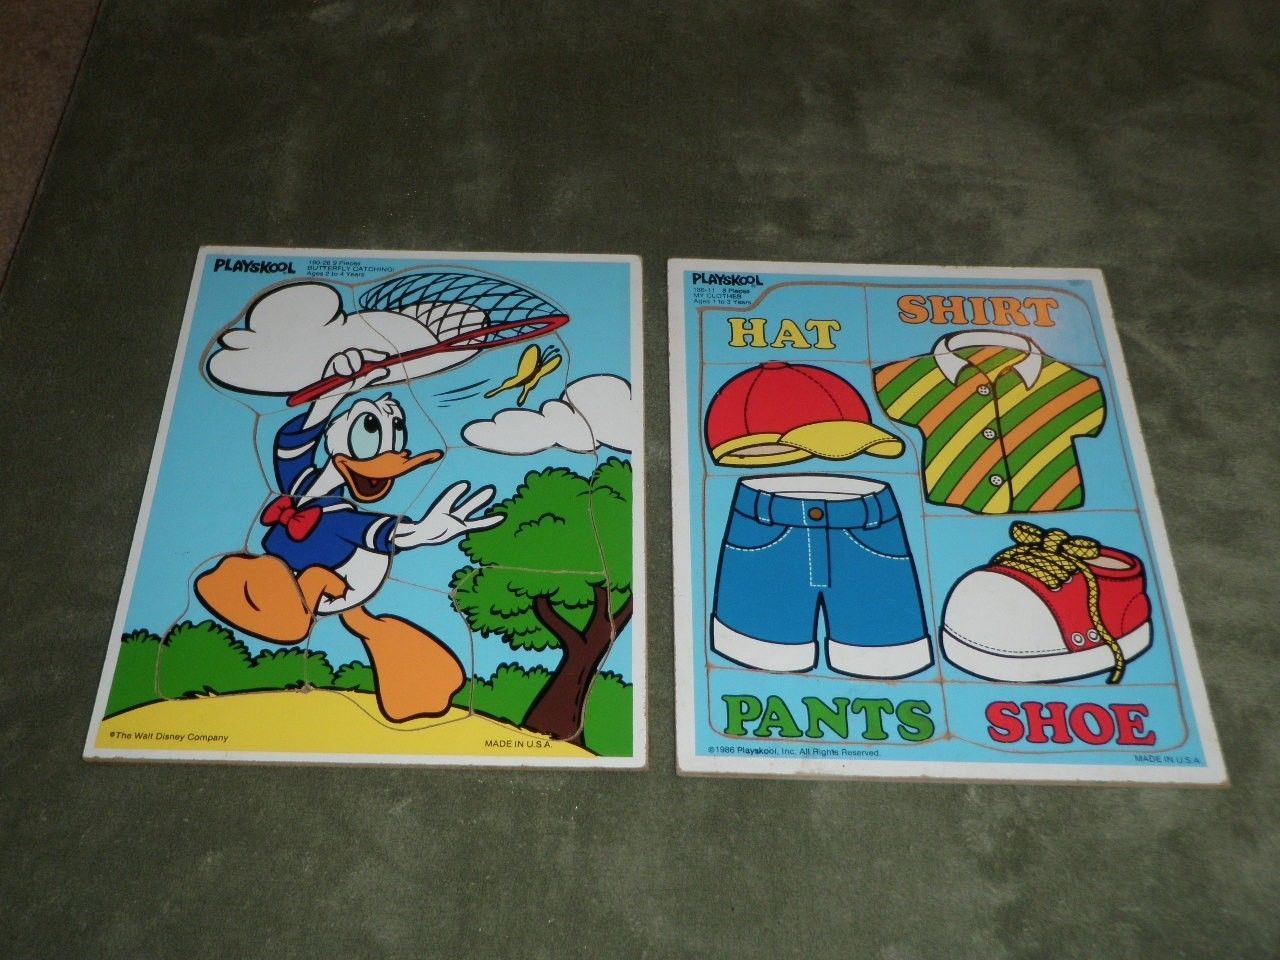 Primary image for Vintage Playskool Puzzle Lot 1986 Clothes Disney Donald Duck